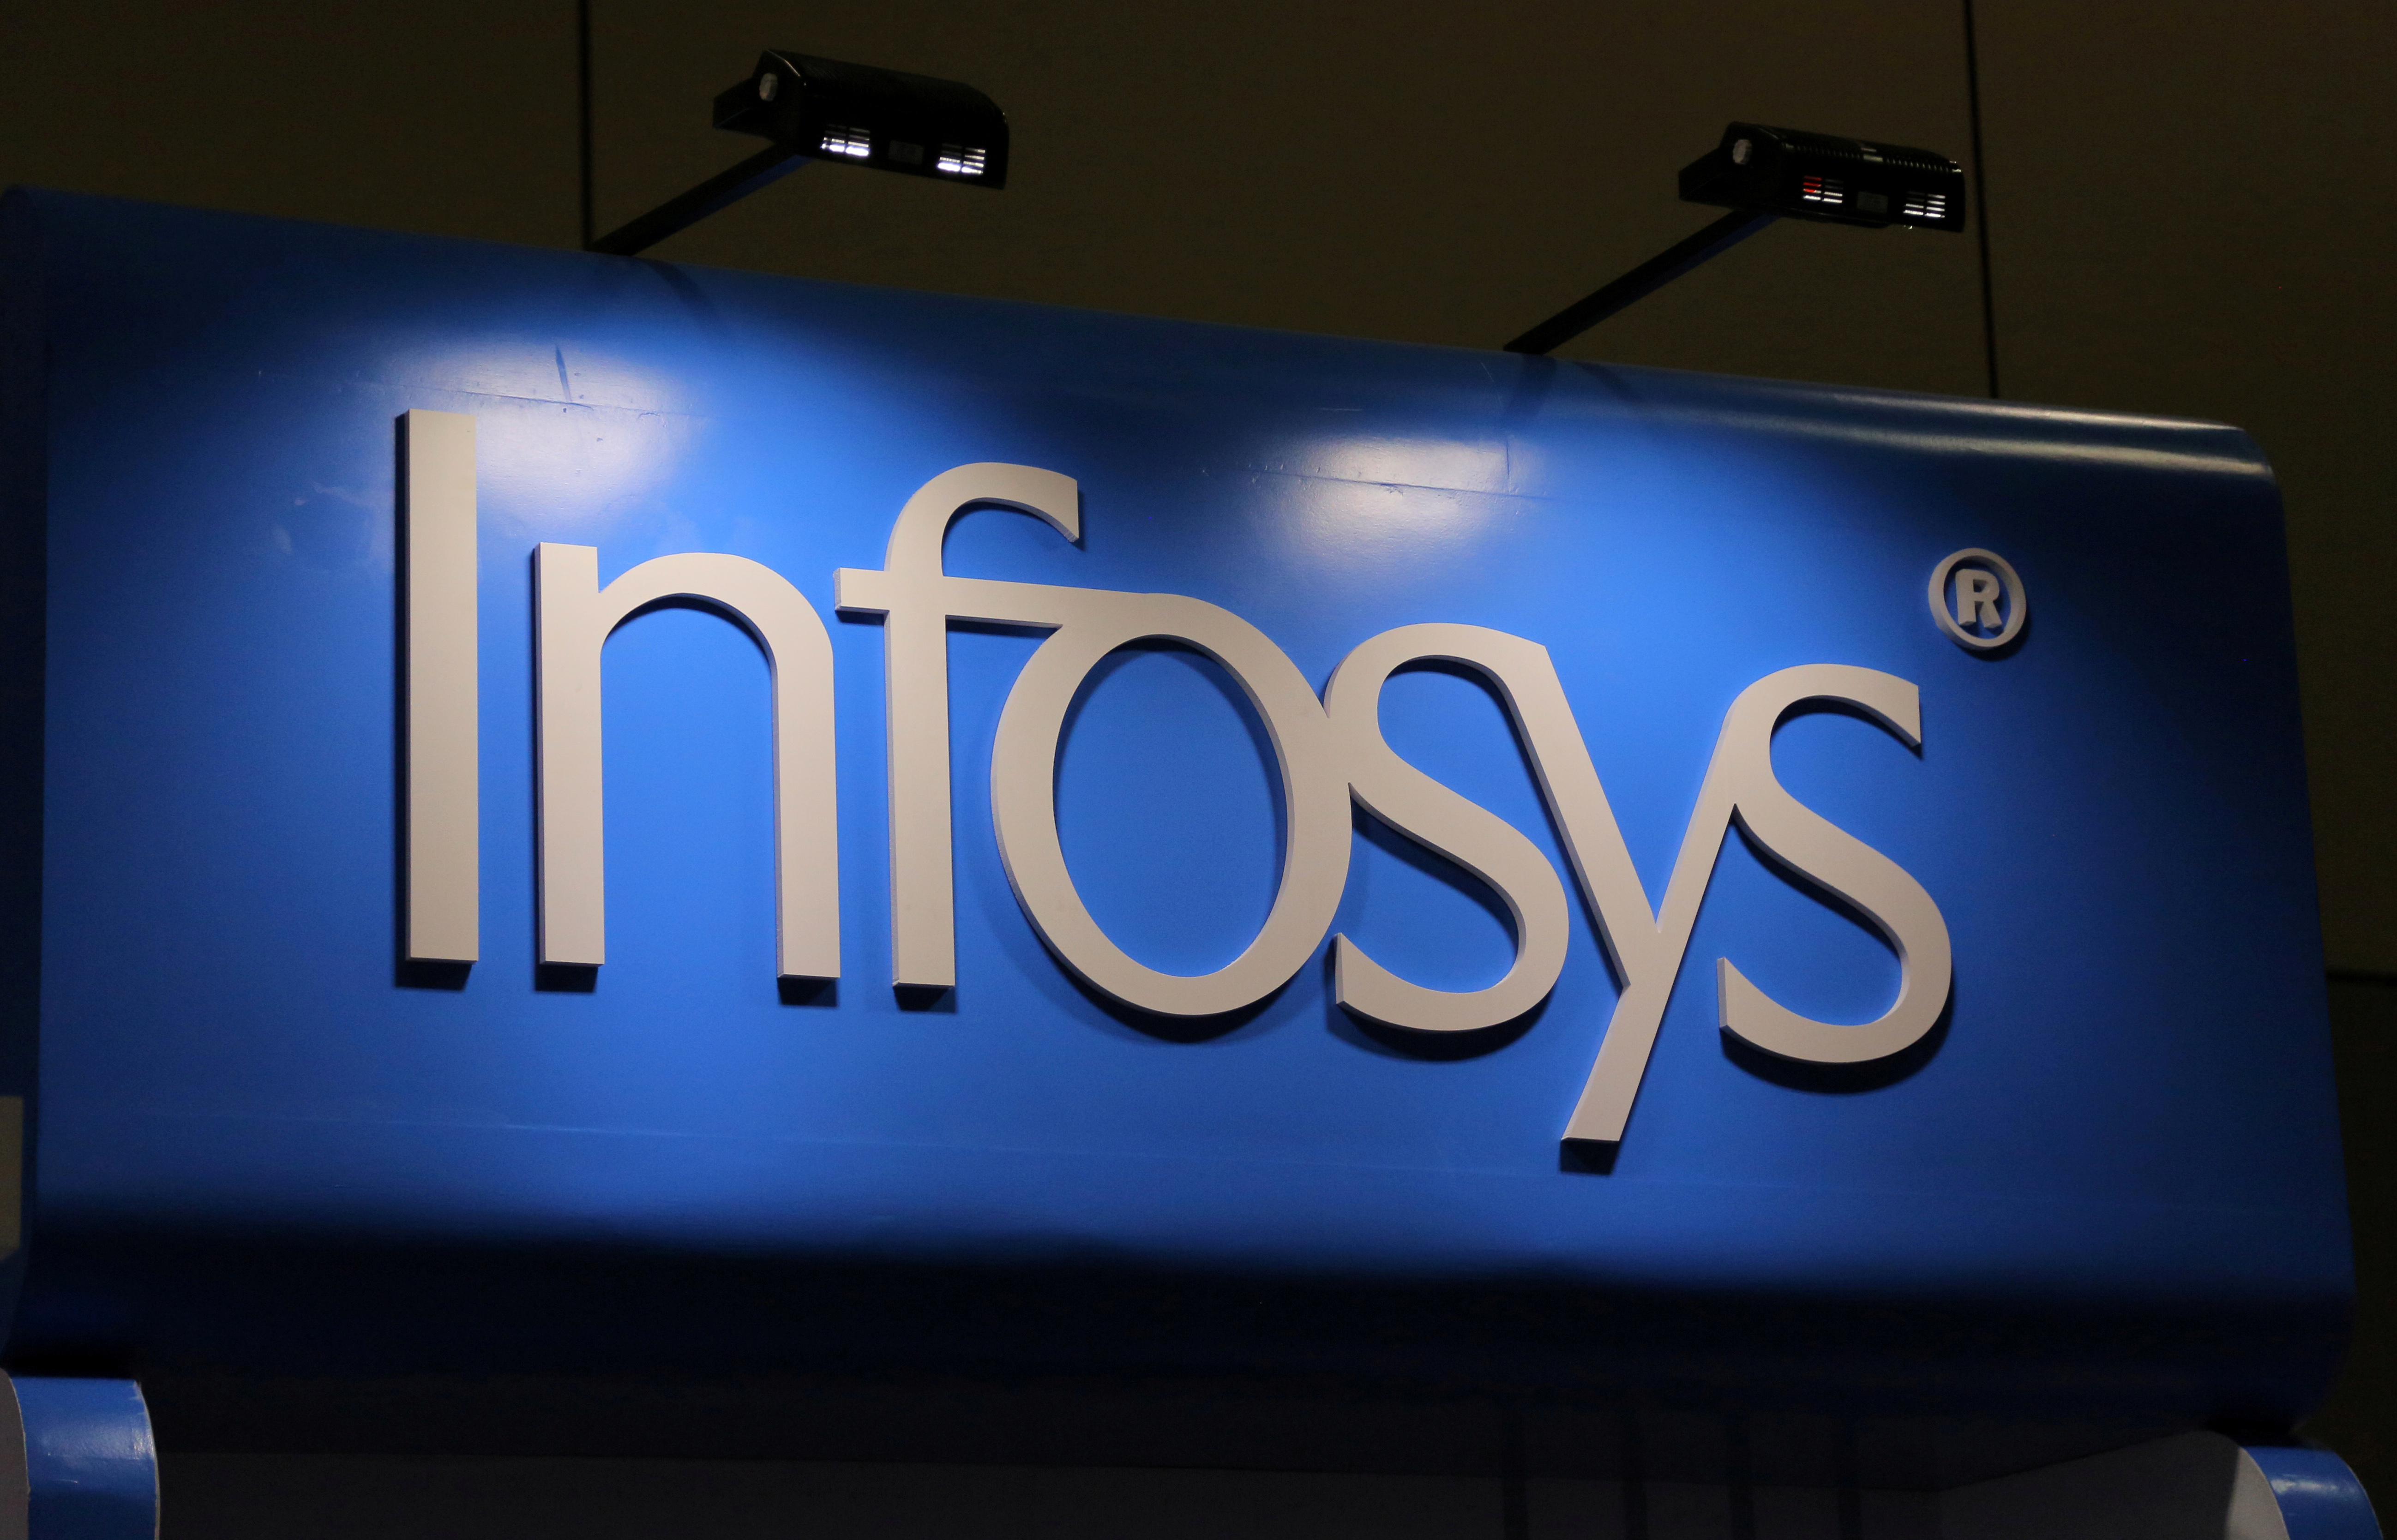 The Infosys logo is seen at the SIBOS banking and financial conference in Toronto, Ontario, Canada October 19, 2017. Picture taken October 19, 2017. REUTERS/Chris Helgren/File Photo